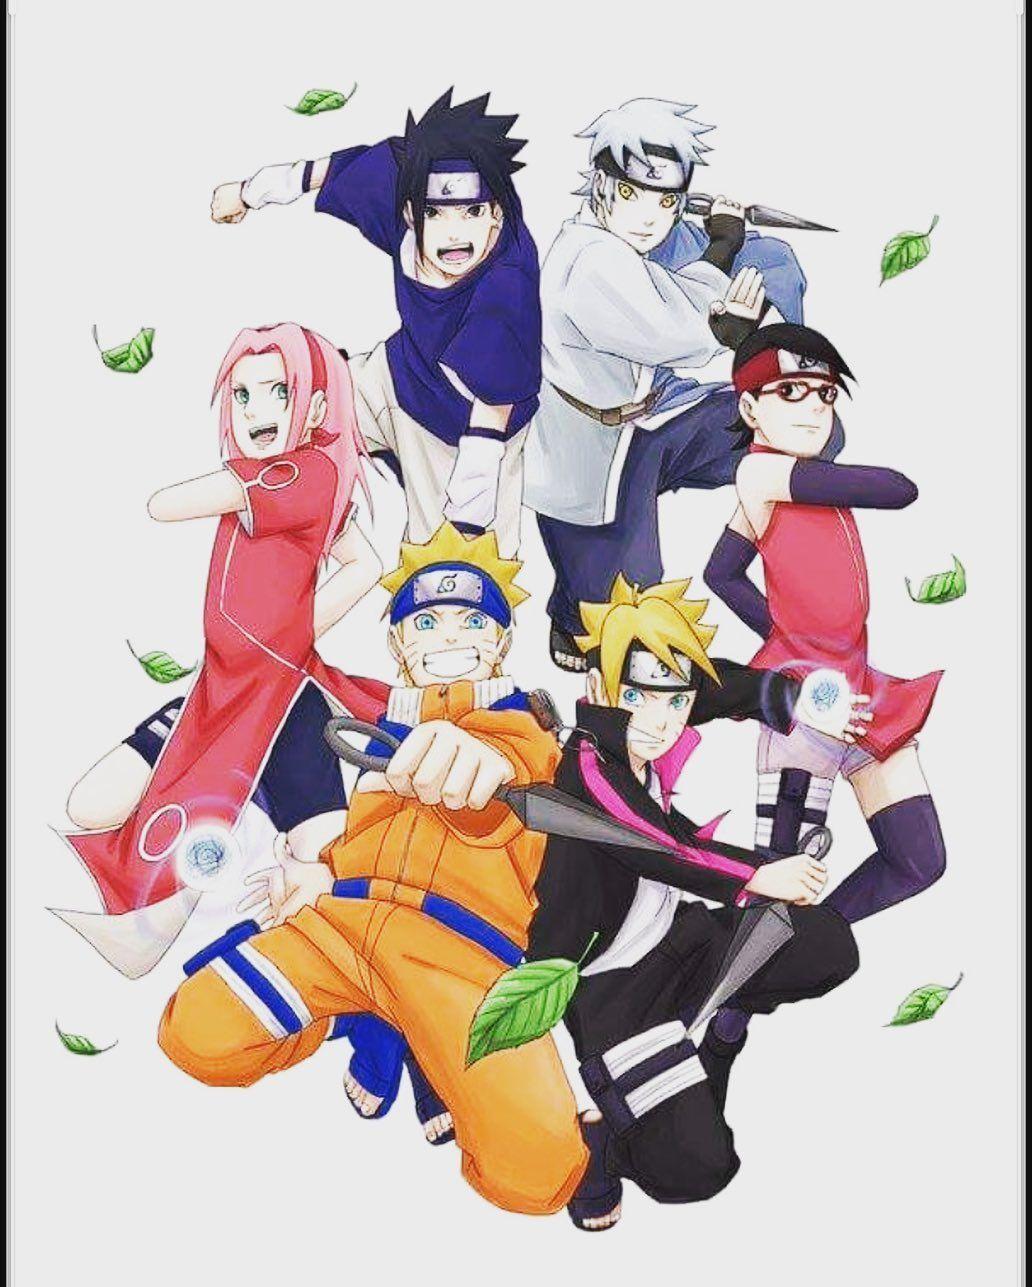 Will The New Team Be Able To Surpass Old One Naruto